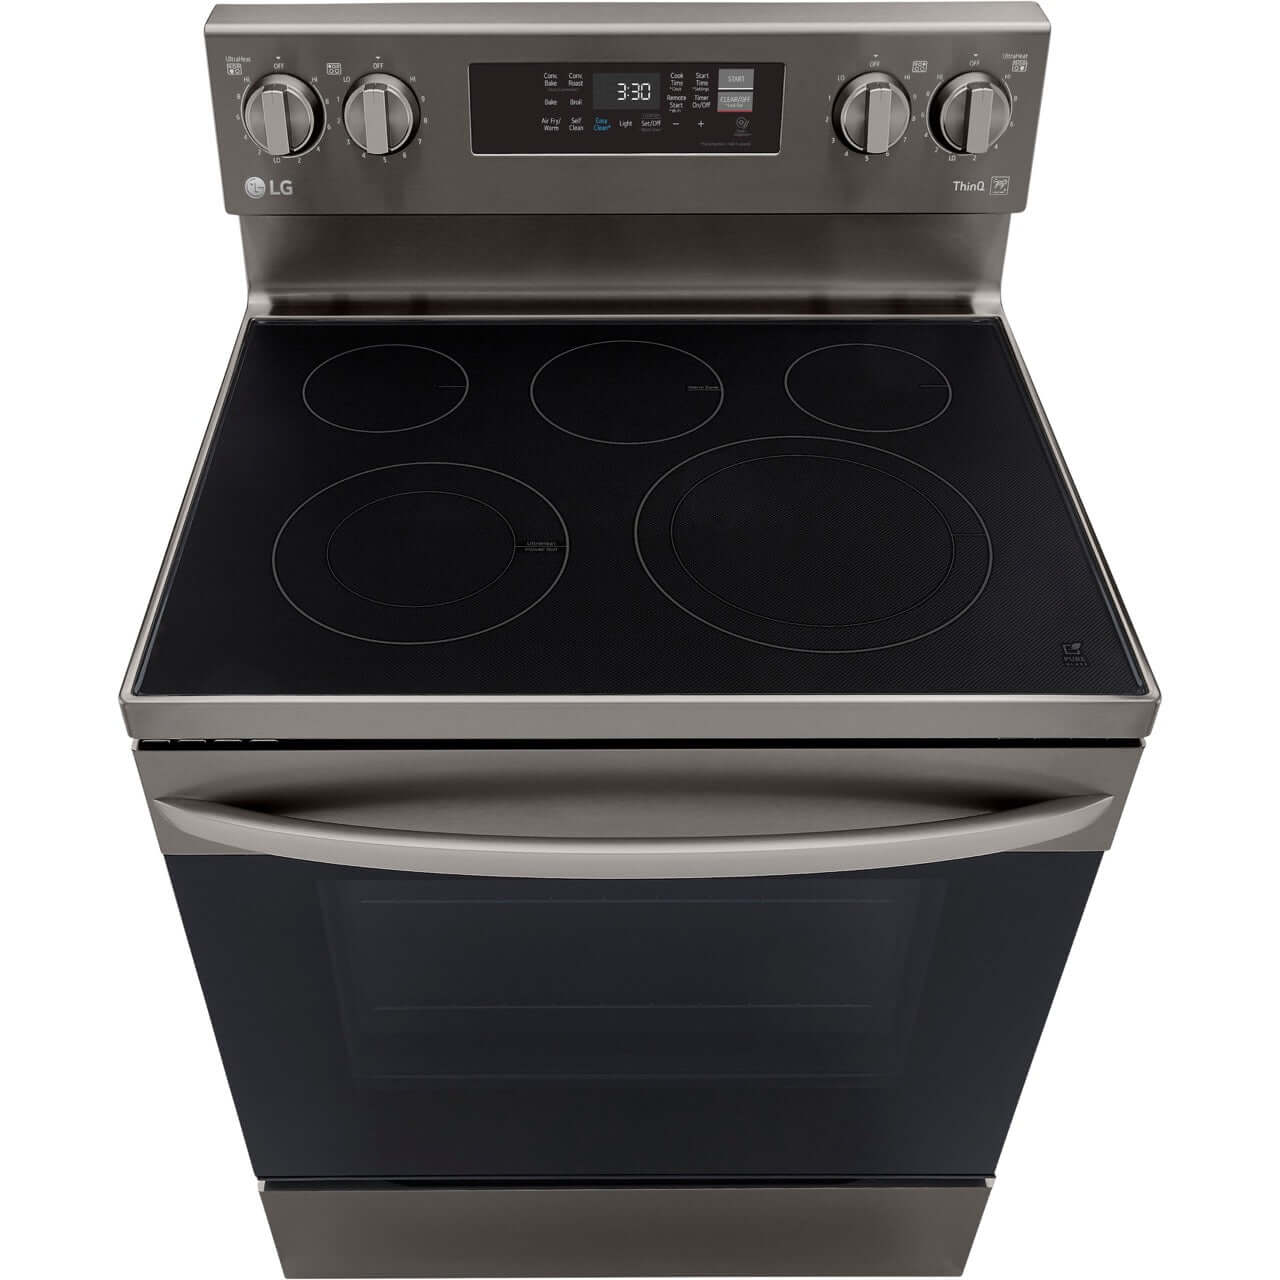 LG 6.3-Cu. Ft. Electric Smart Range with EasyClean and AirFry Black Stainless Steel (LREL6323D)